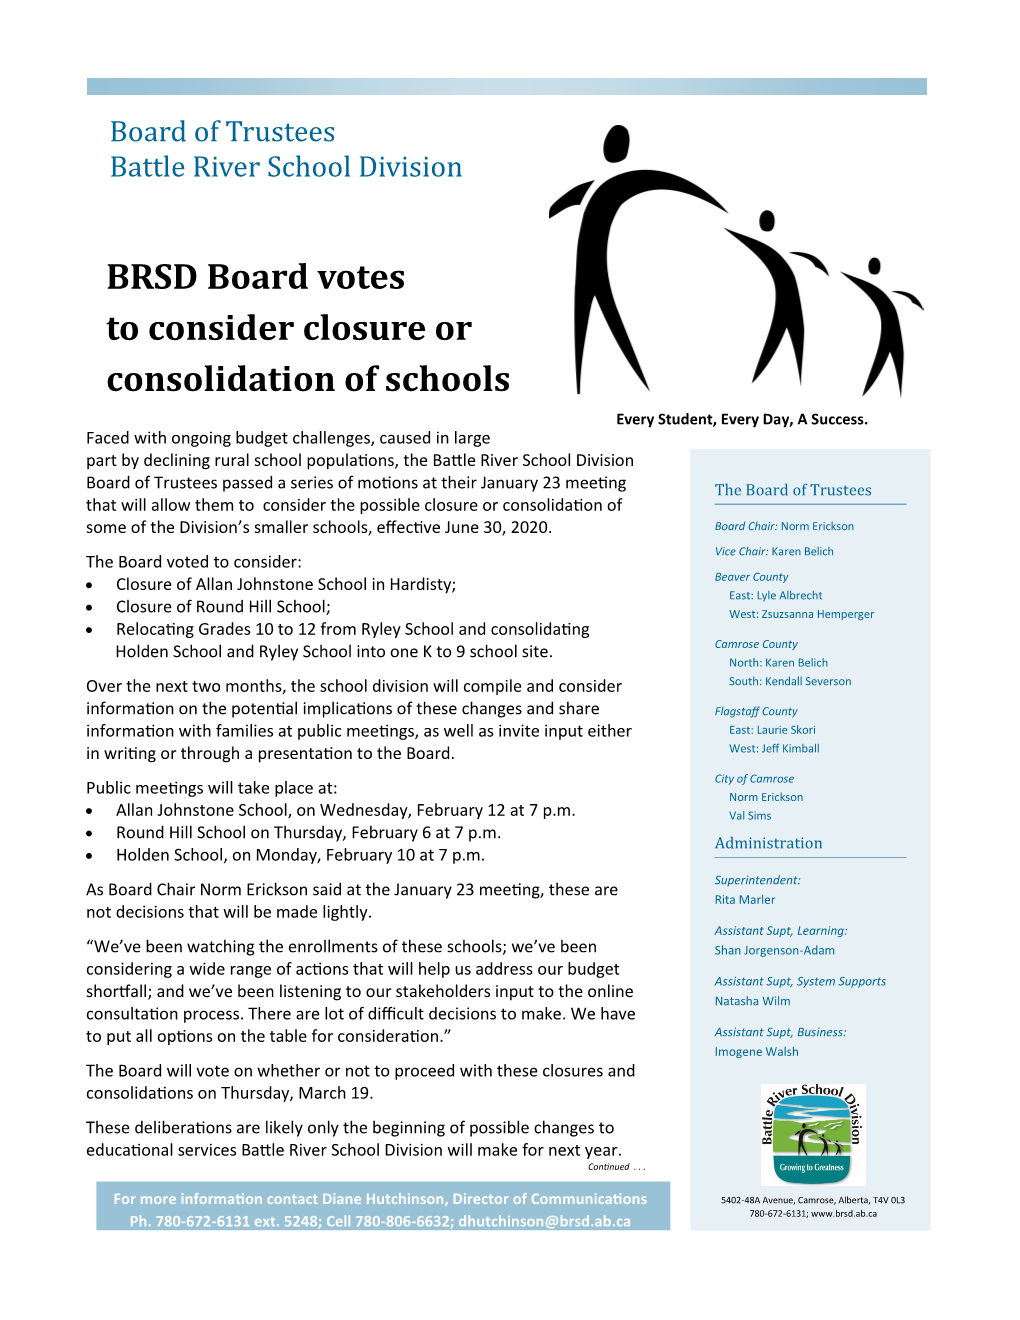 BRSD Board Votes to Consider Closure Or Consolidation of Schools Every Student, Every Day, a Success